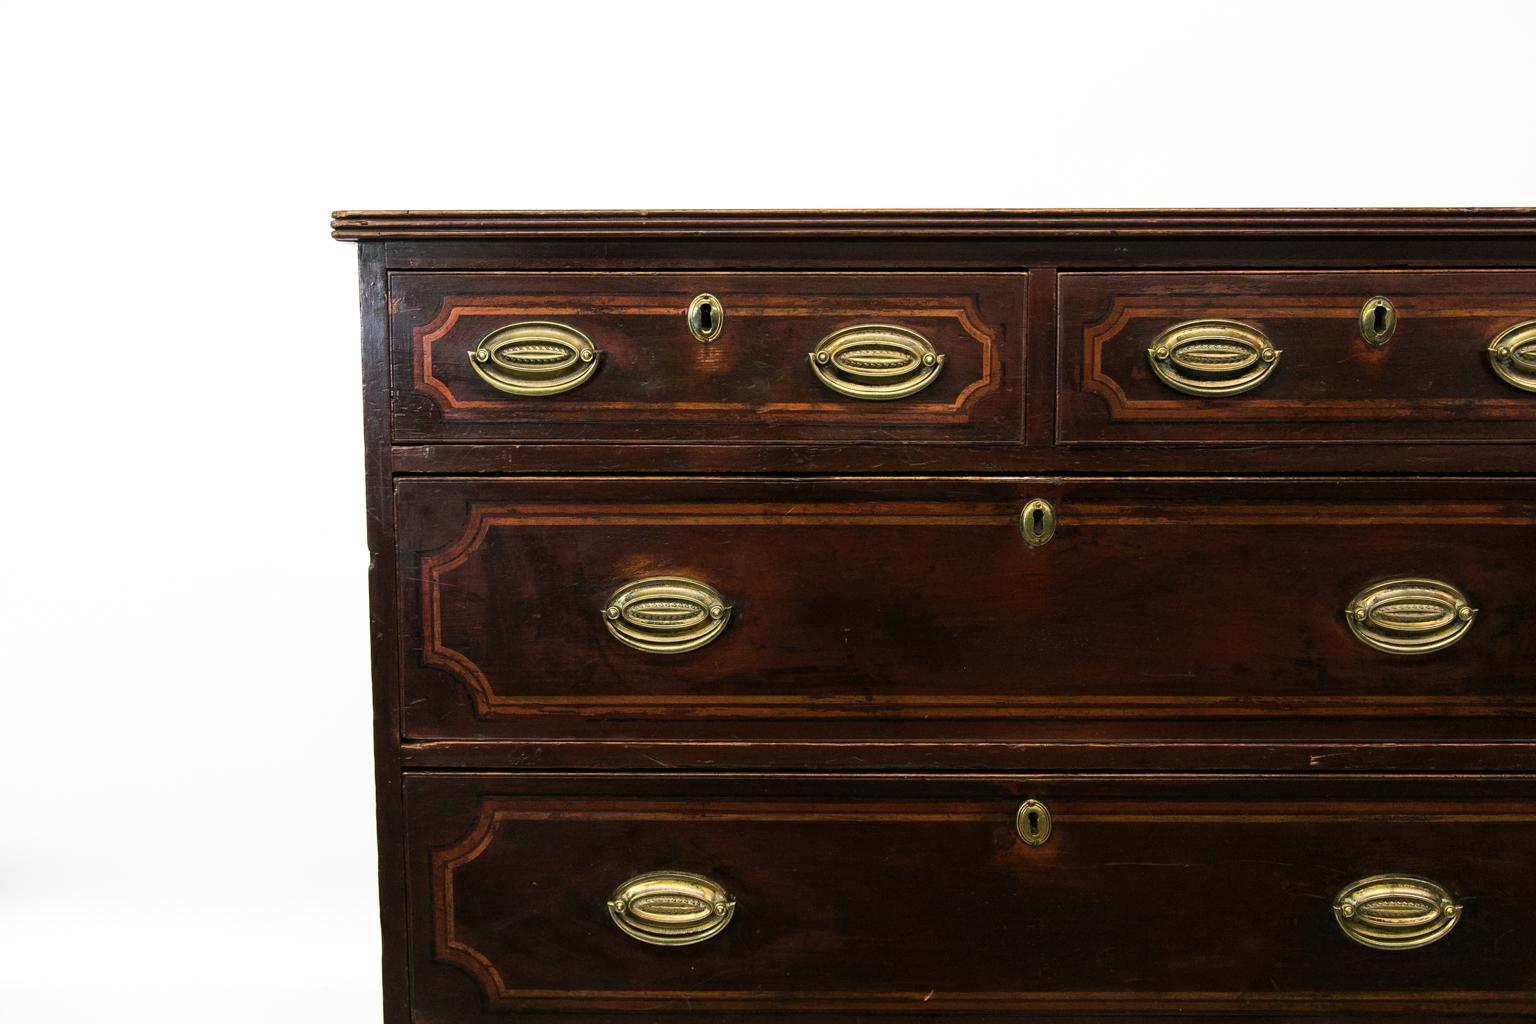 English faux painted five-drawer chest is all original, including the hardware. The top has reeded edging and the drawers and top have been painted to simulate ebony and other inlays.